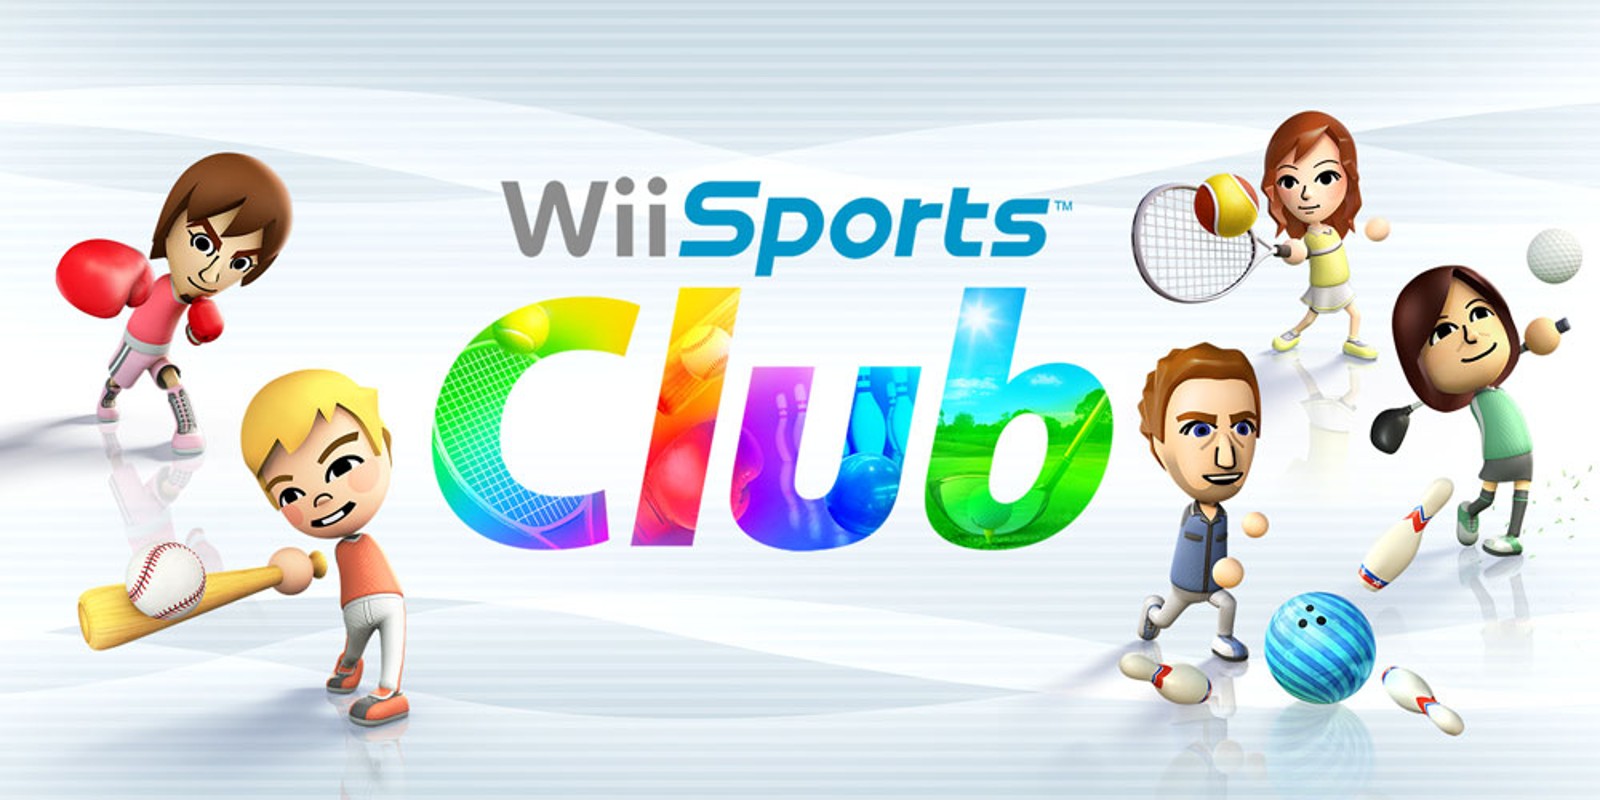 Pure Characterize it's beautiful Wii Sports Club | Wii U download software | Games | Nintendo